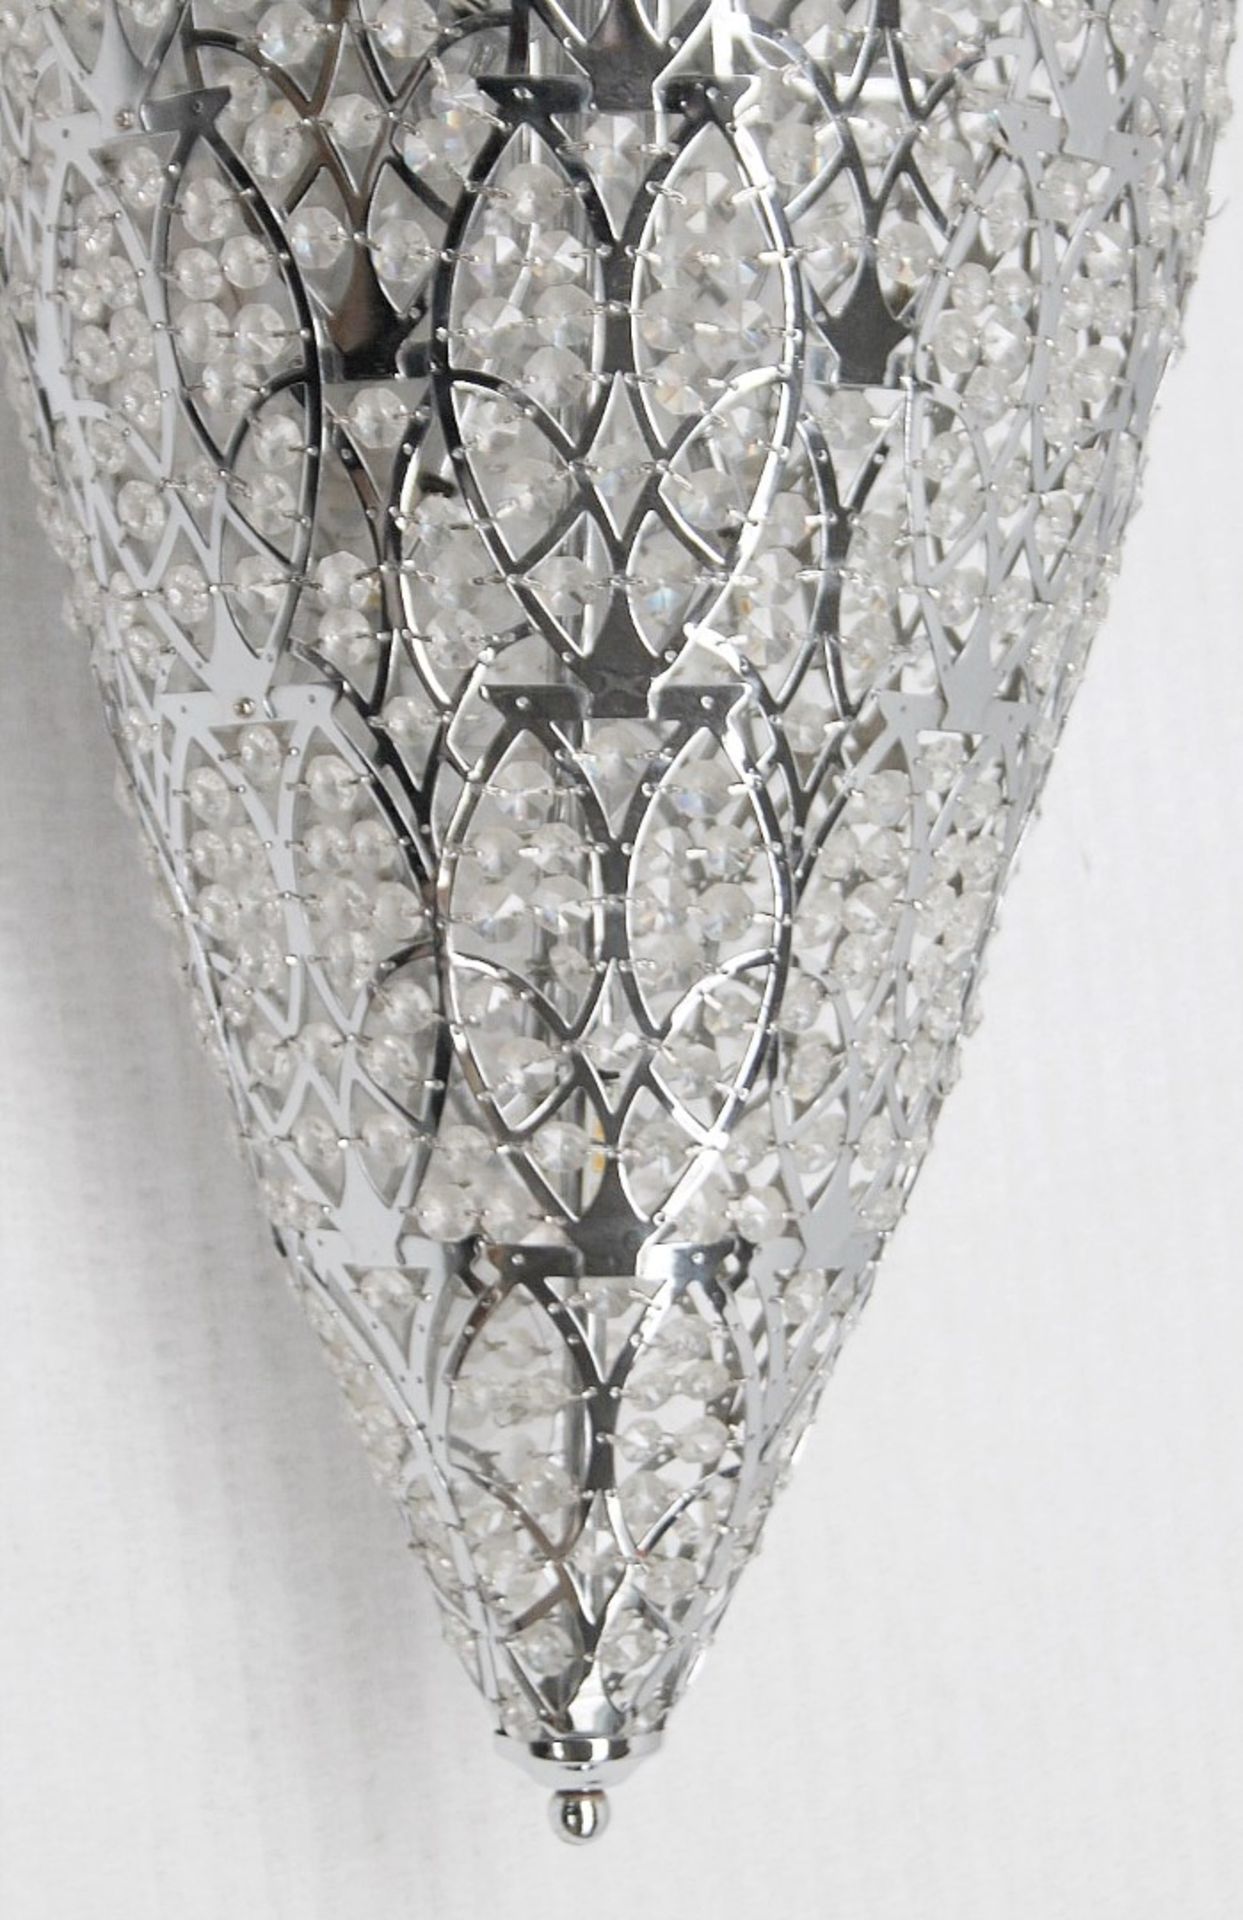 1 x High-end Italian LED Light Fitting Encrusted In Premium ASFOUR Crystal Elements - Approximate - Image 6 of 8